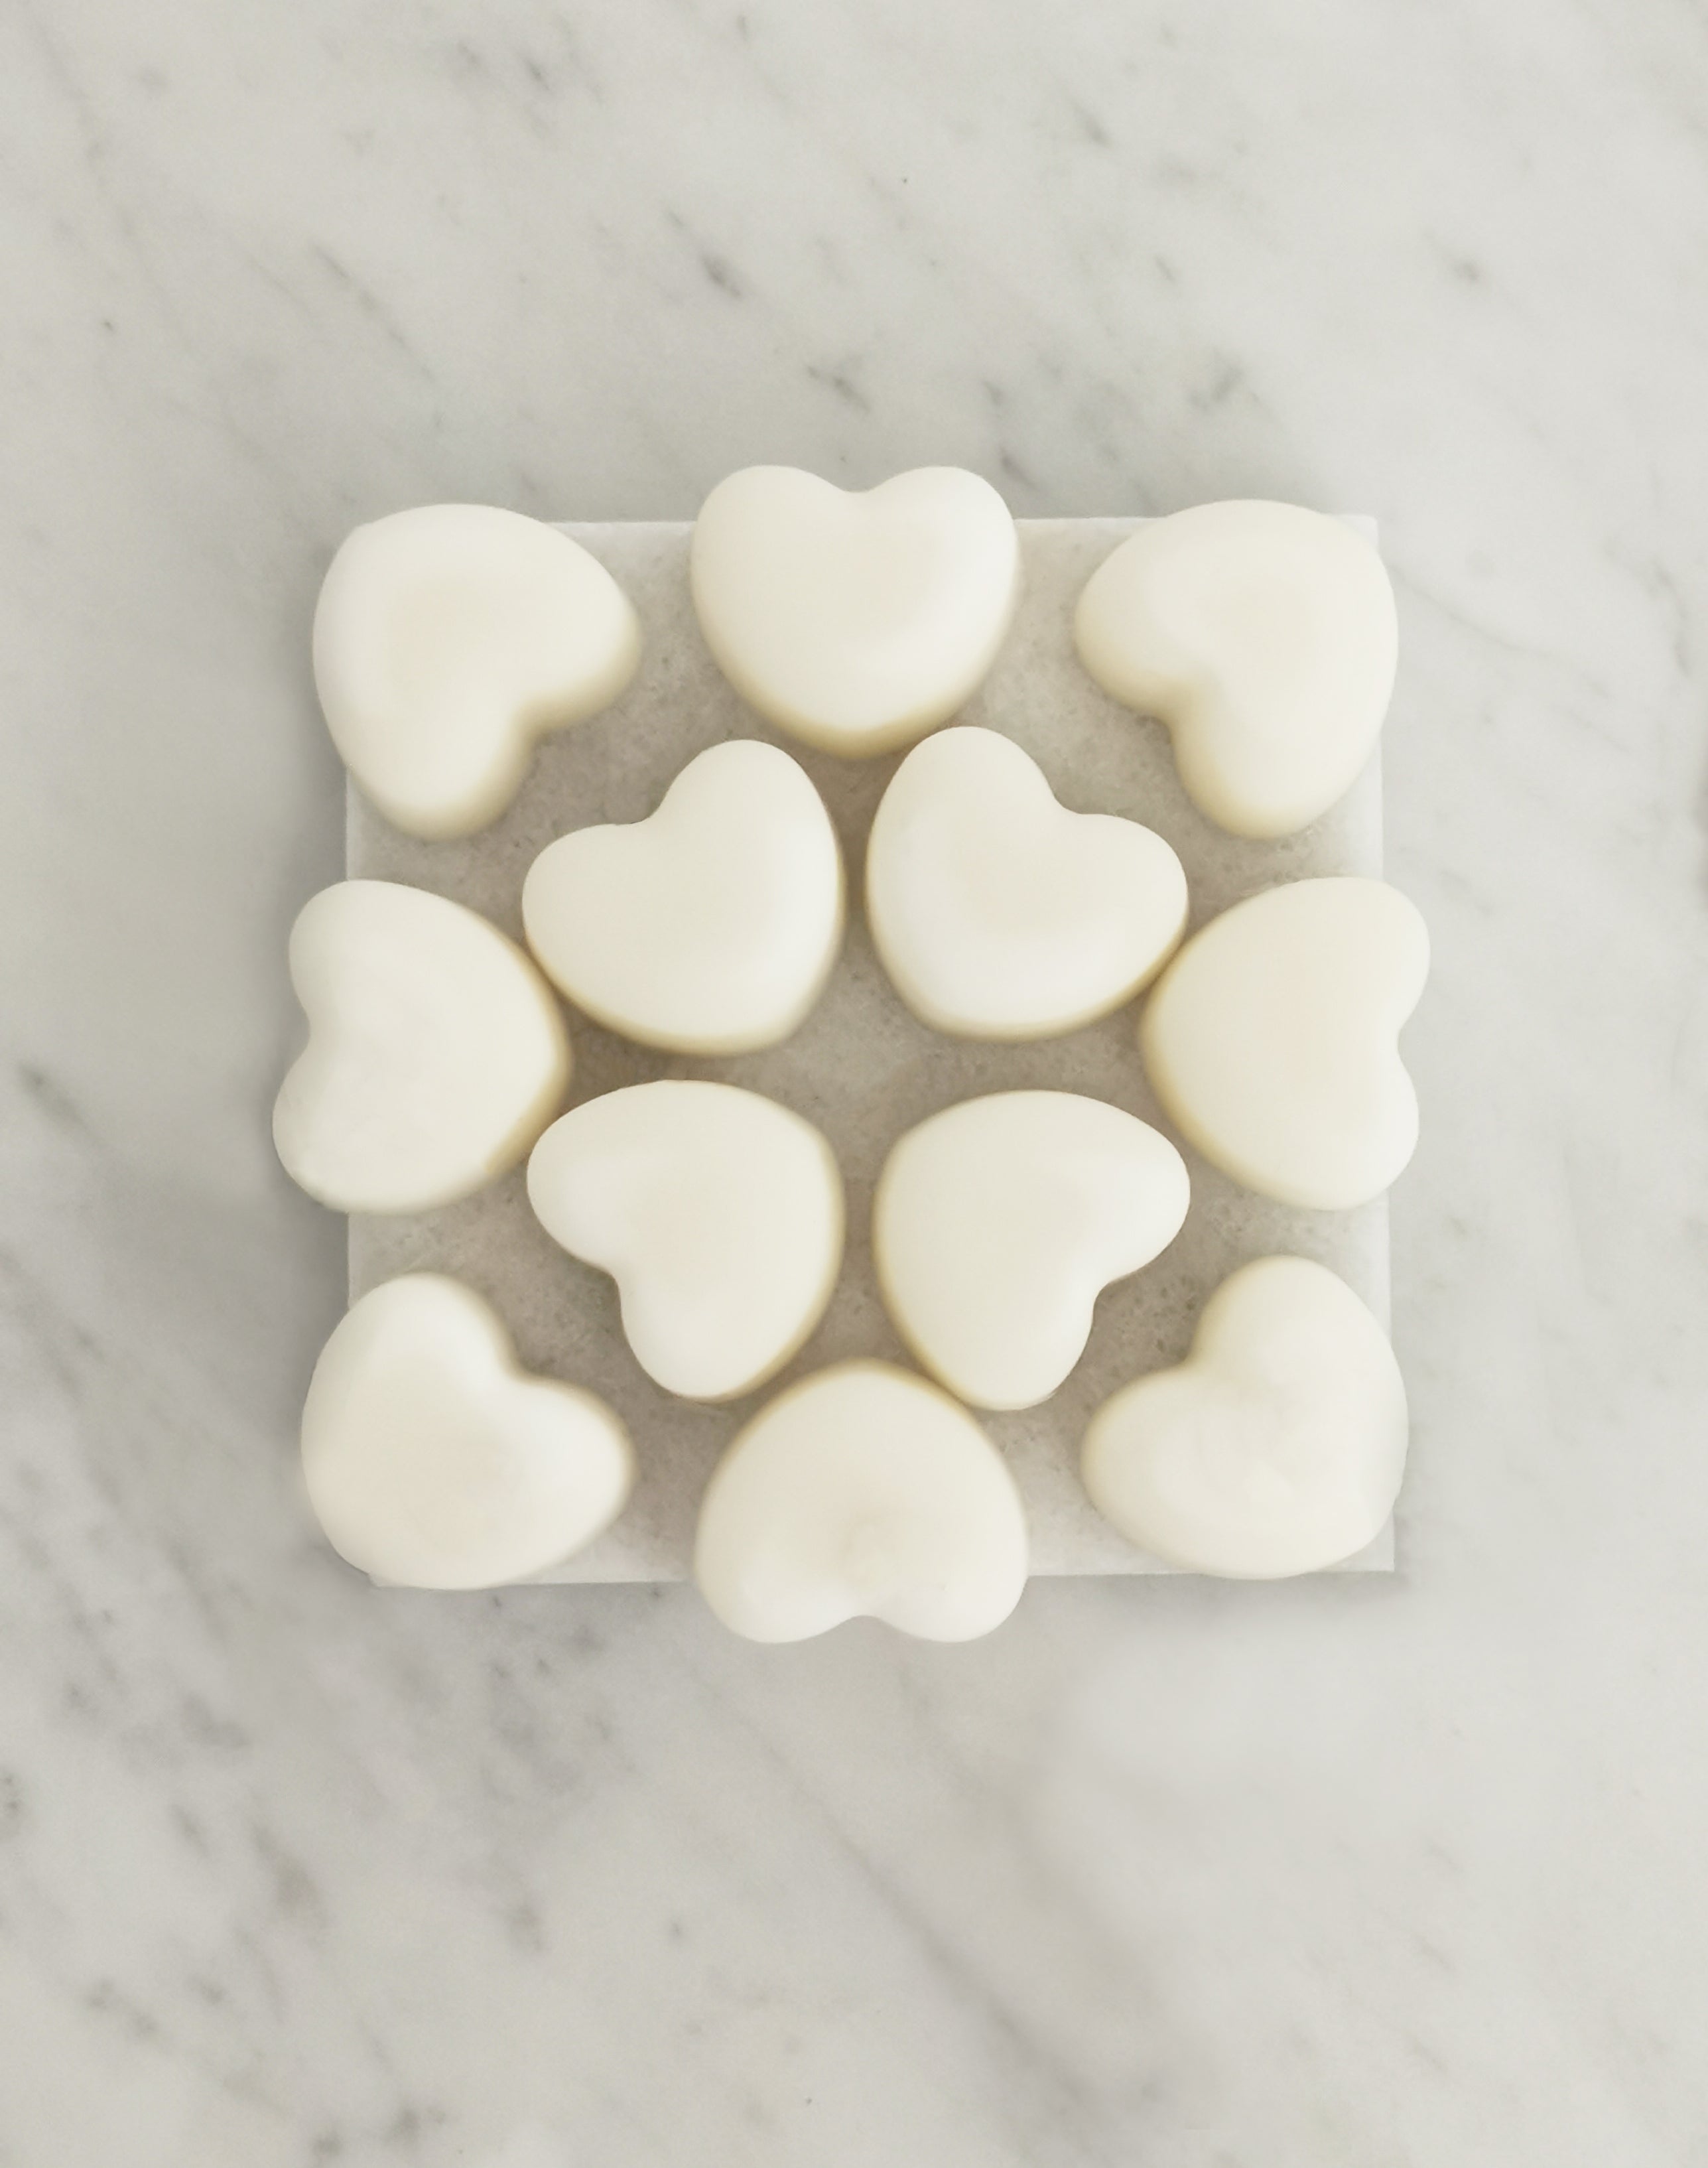 Peppermint, Eucalyptus & Pine Aromatherapy Wax Melts with Organic Essential Oils